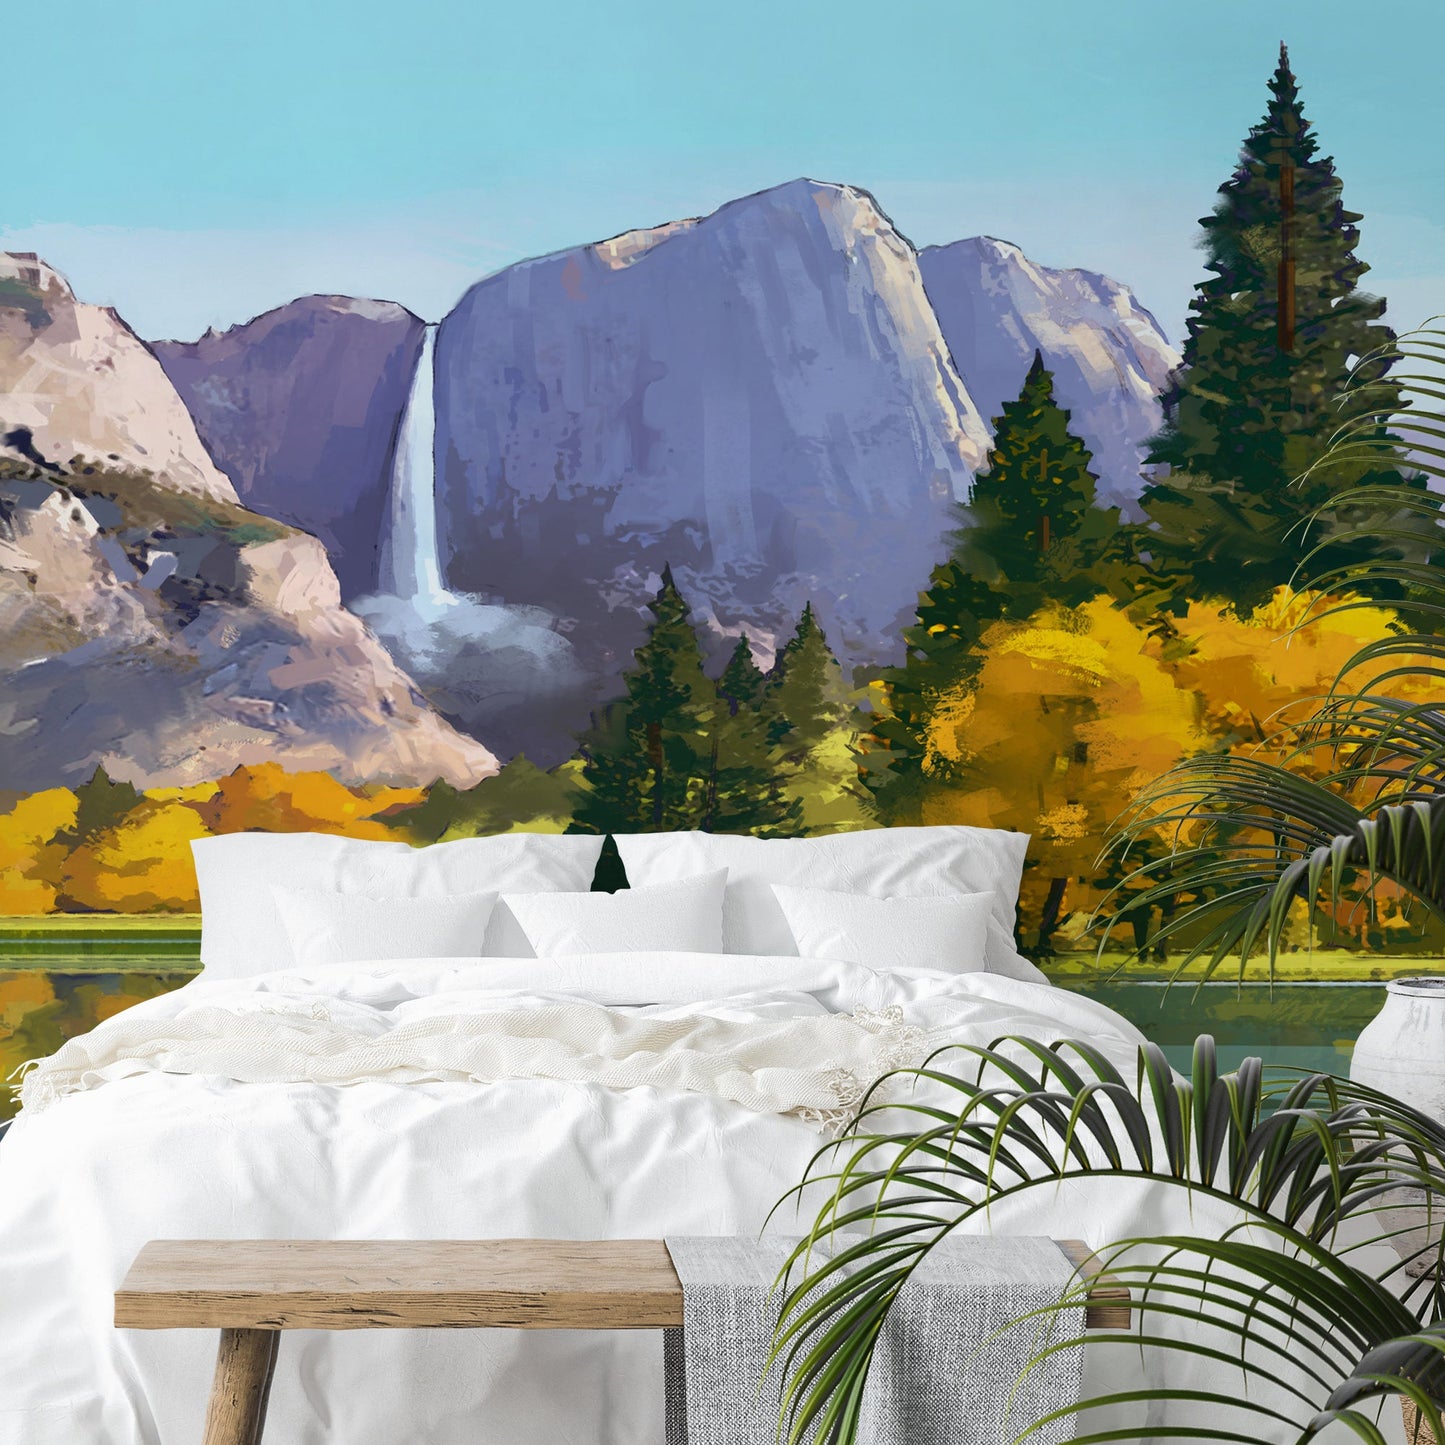 Peel & Stick Wall Mural - Yosemite National Park By Anderson Design Group